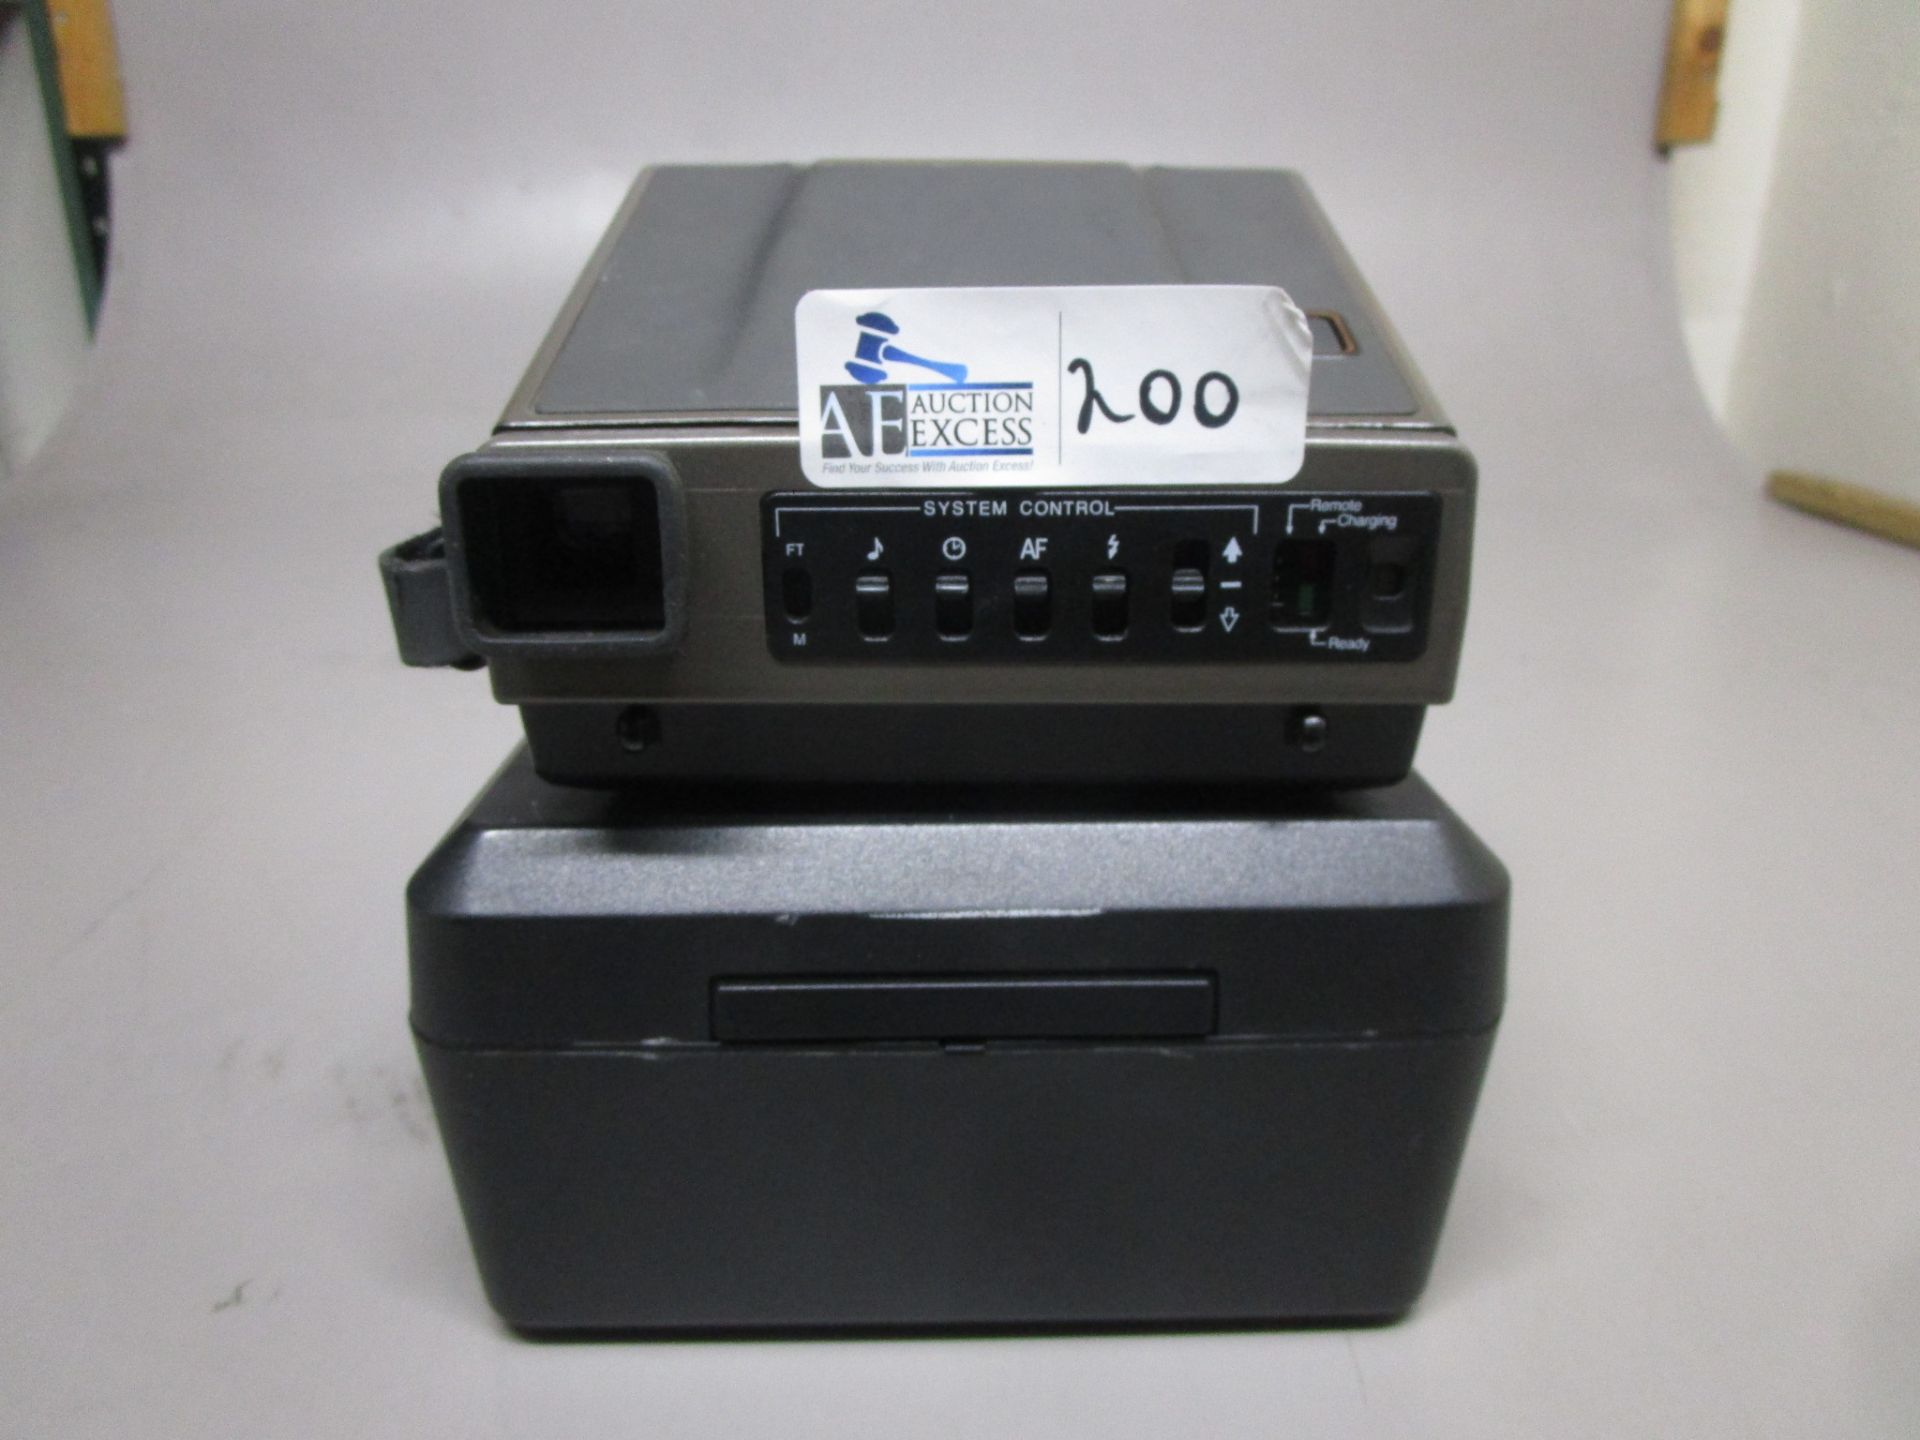 POLAROID SPECTRA SYSTEM CAMERA IN CASE WITH MANUAL - Image 3 of 4